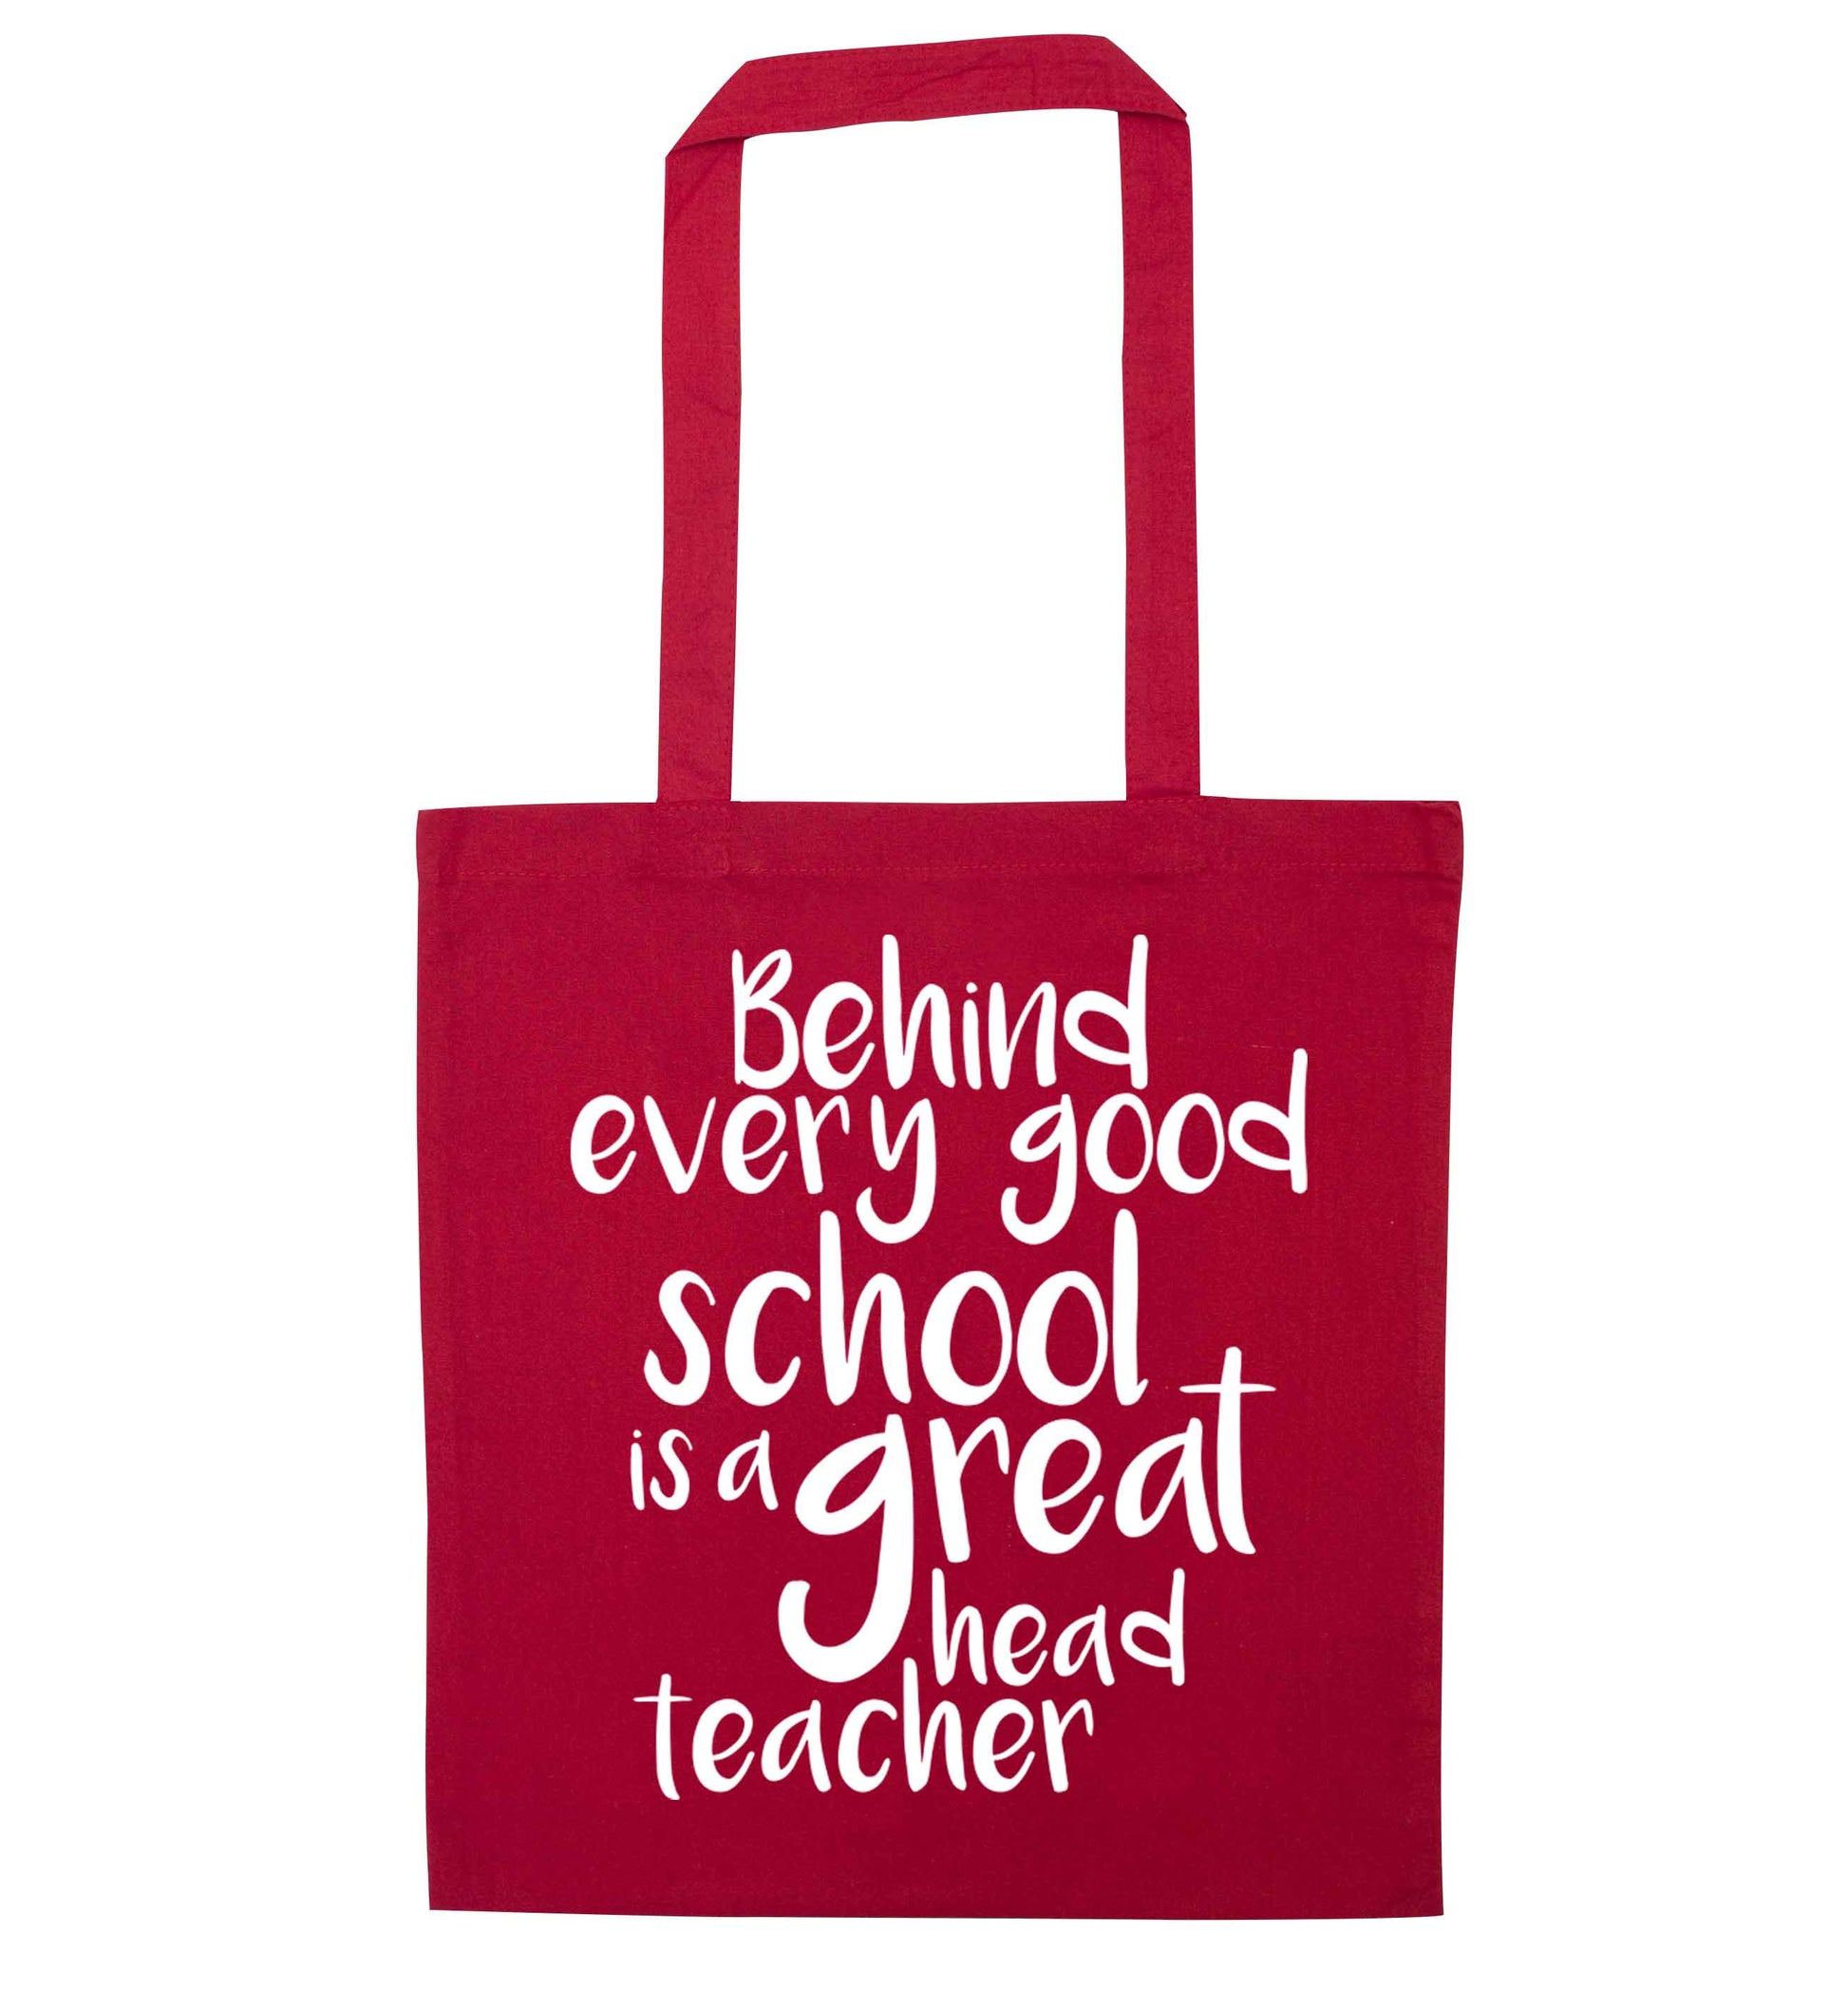 Behind every good school is a great head teacher red tote bag